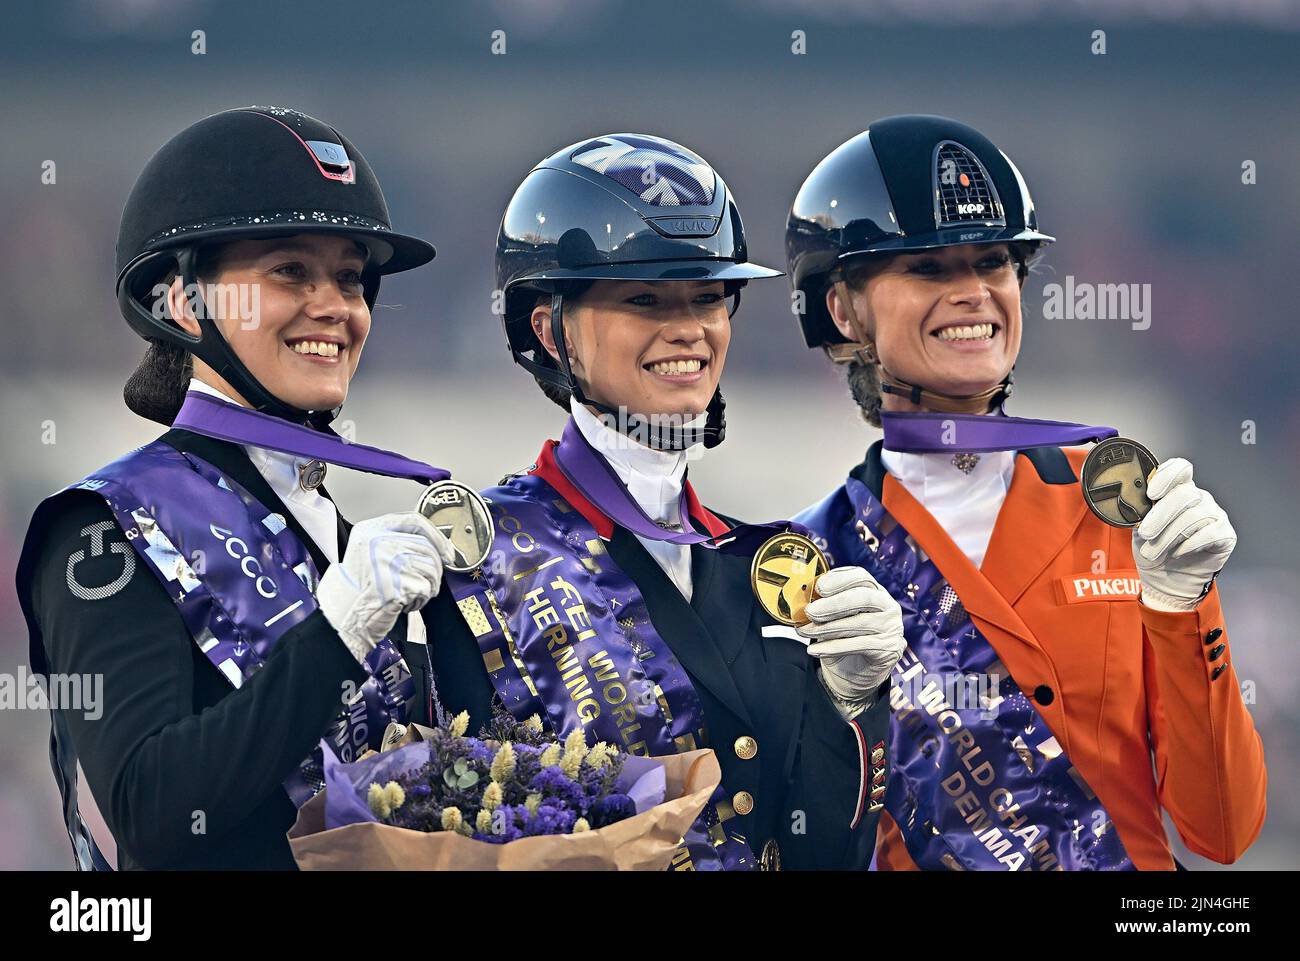 Herning, Denmark. 08th Aug, 2022. World Equestrian Games. The three medalists of the Blue Hors FEI world dressage grand prix special championship. (l to r) Cathrine Laudrup-dufour (DEN, silver) riding VAMOS AMIGOS, Charlotte Fry (GBR, gold) riding GLAMOURDALE and Dinja Van Liere (NED, bronze) riding HERMES Credit: Sport In Pictures/Alamy Live News Stock Photo